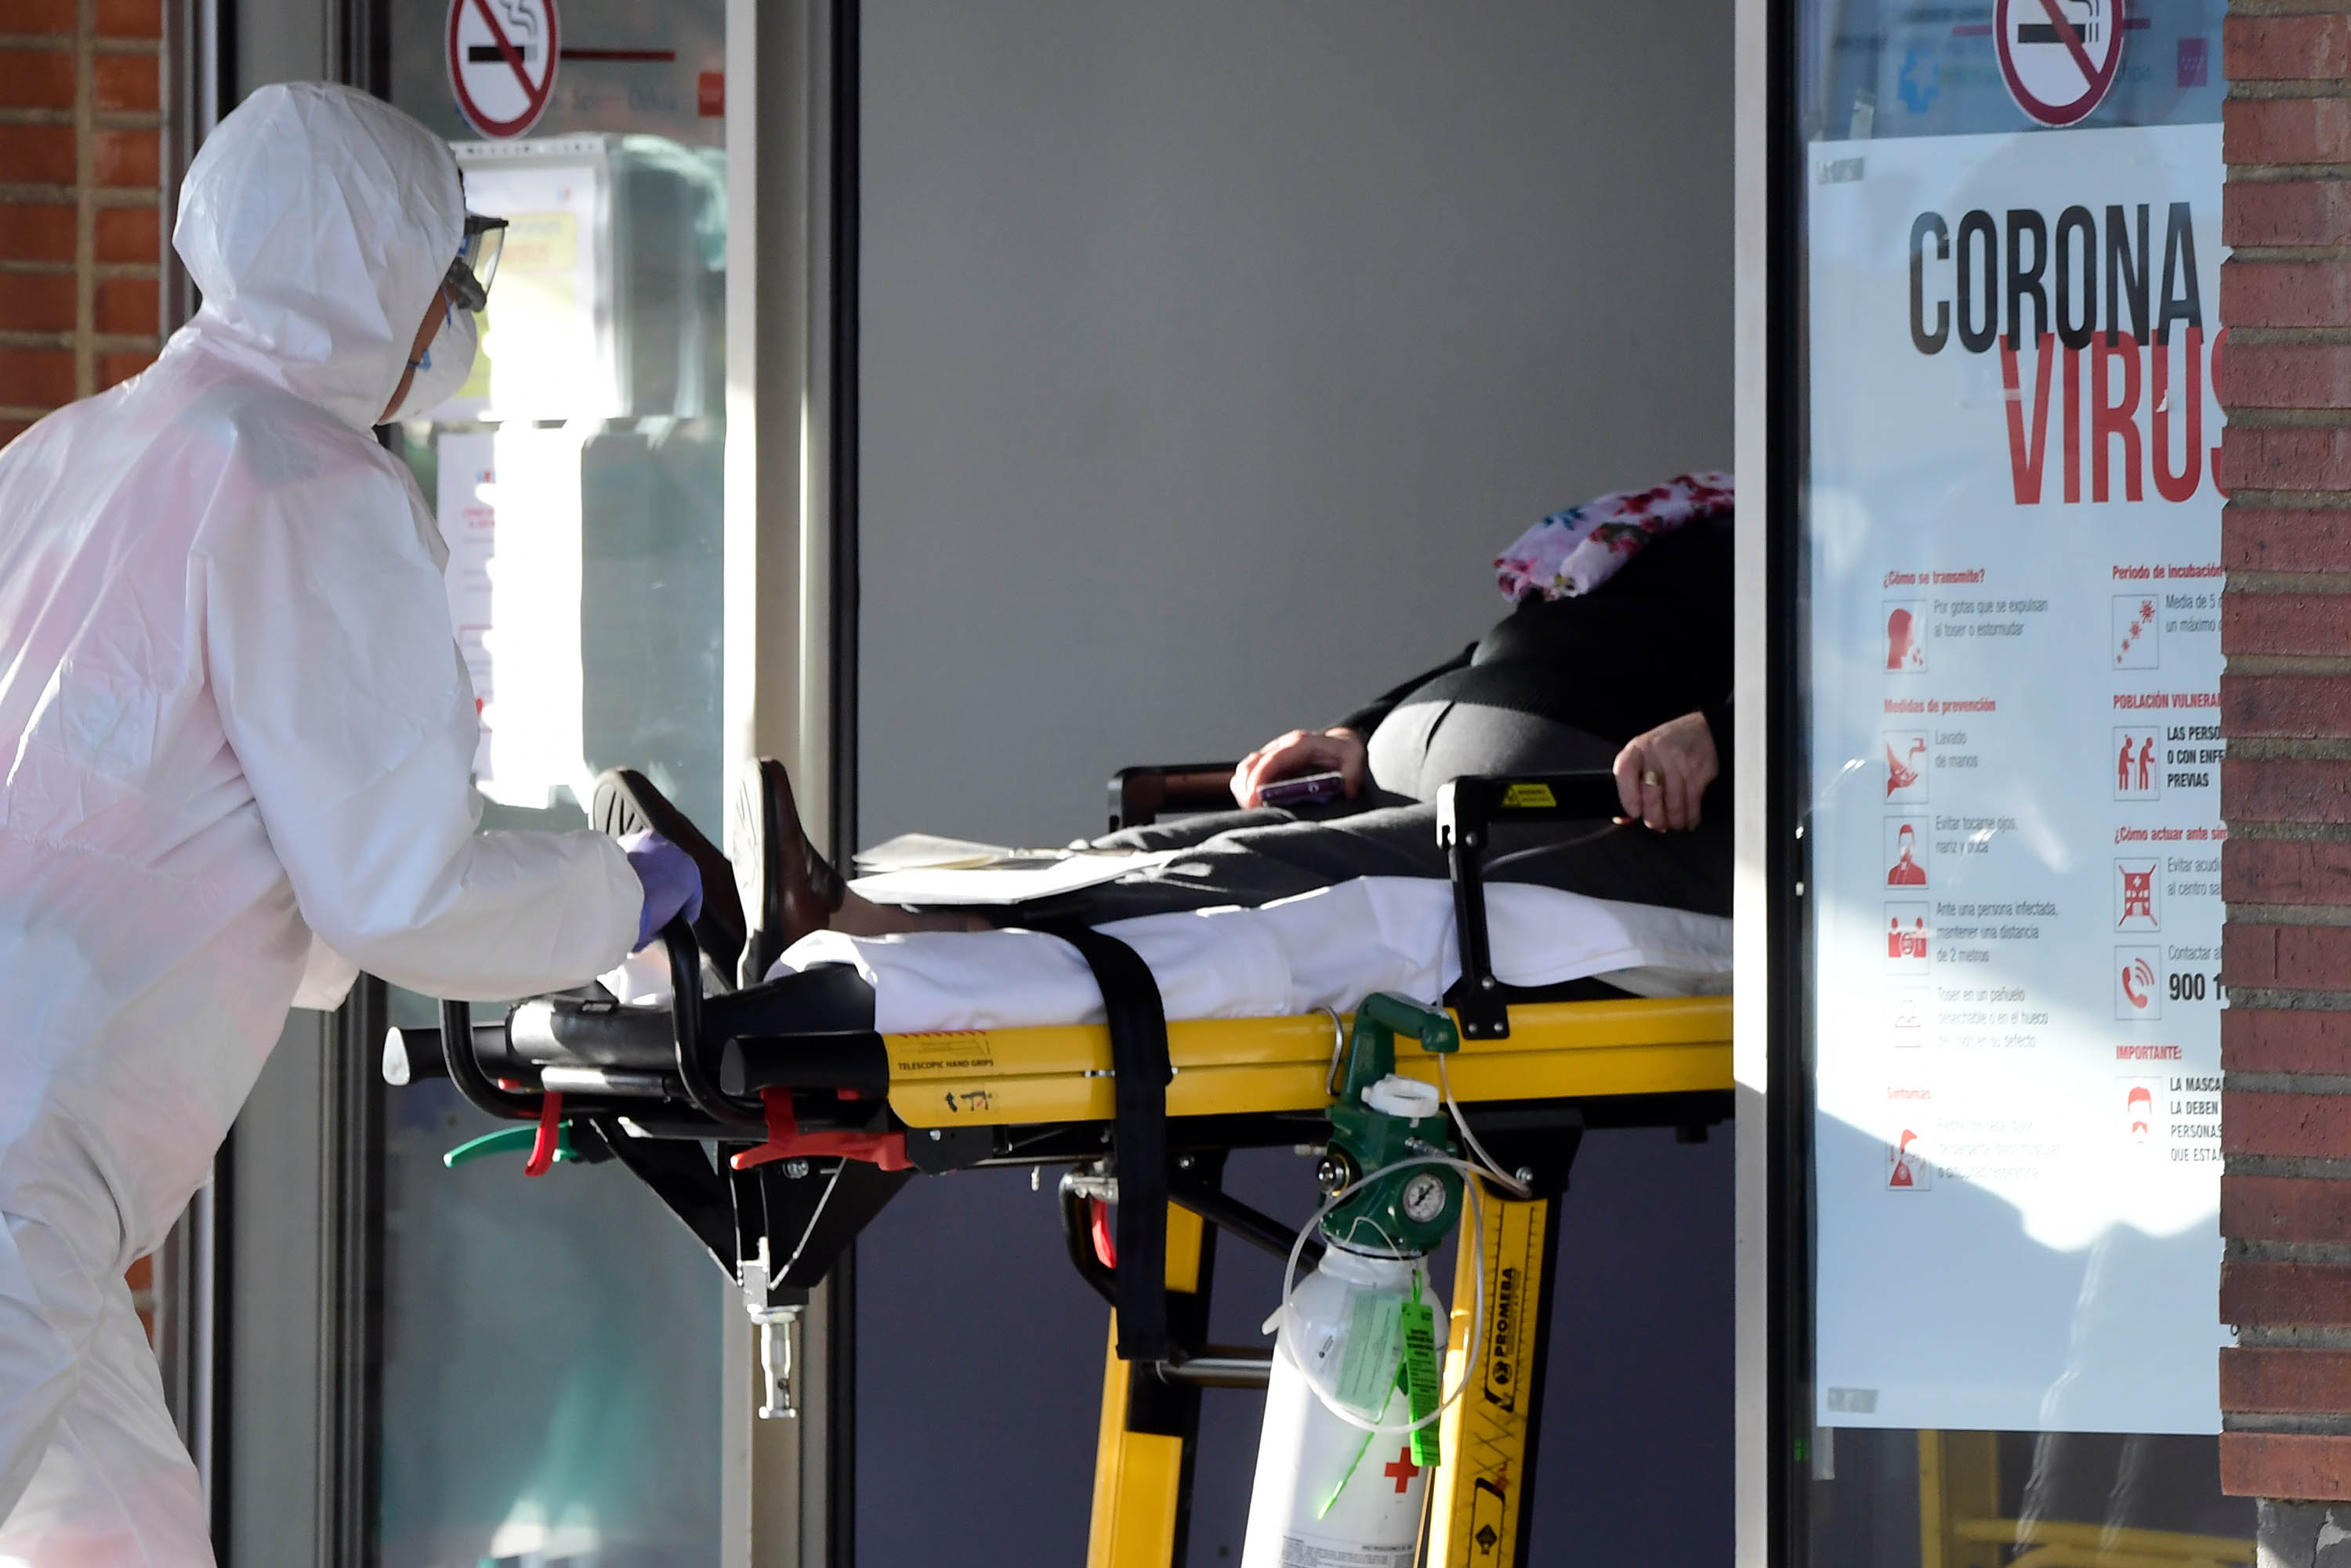 A health worker wearing personal protective equipment pushes a patient on a stretcher at a hospital in Leganes, Spain, on March 26. JAVIER SORIANO/AFP via Getty Images)